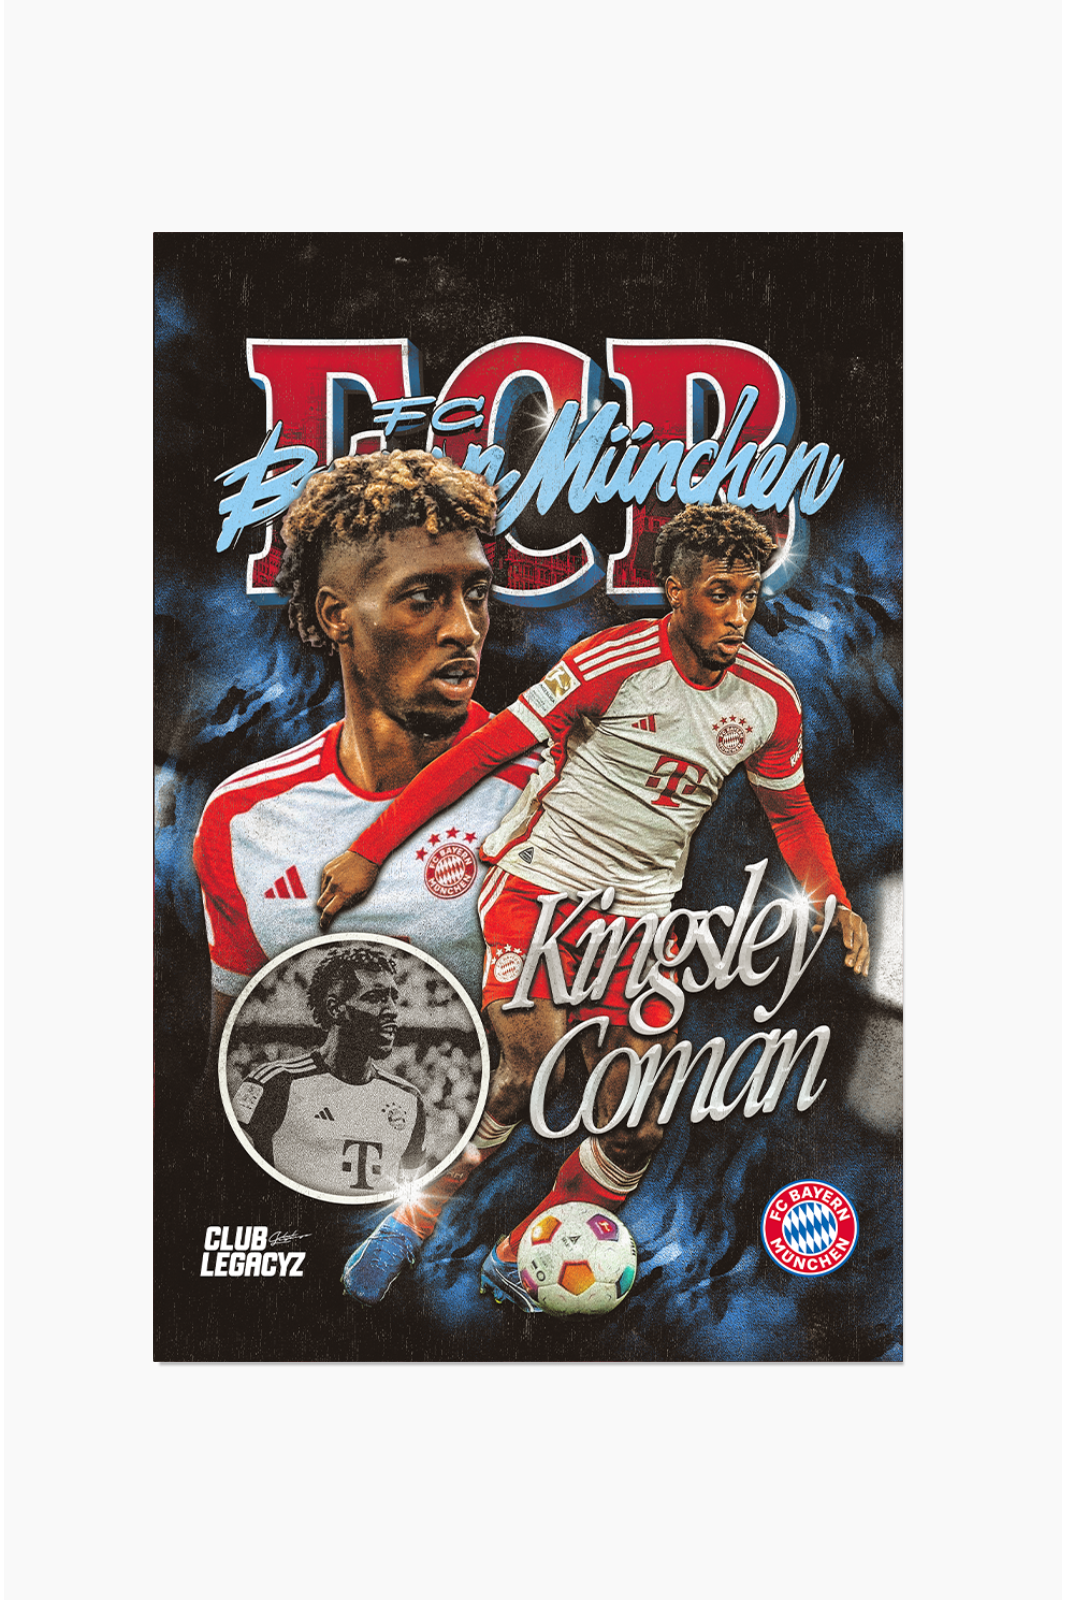 FC Bayern Munich - Poster Kingsley Coman 100 exemplaires